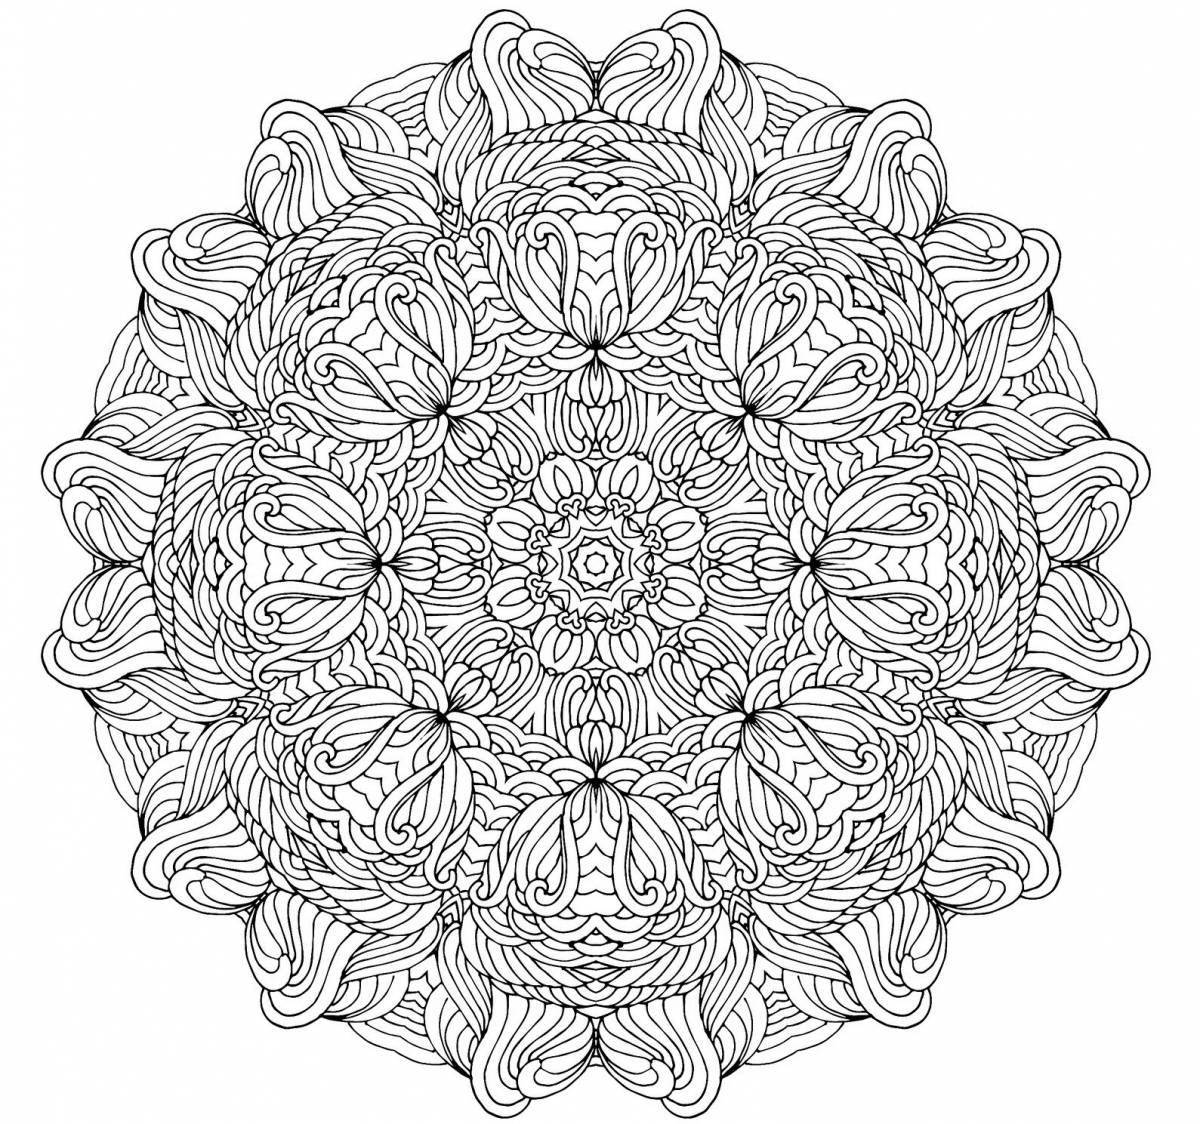 Intricate mandala coloring for adults